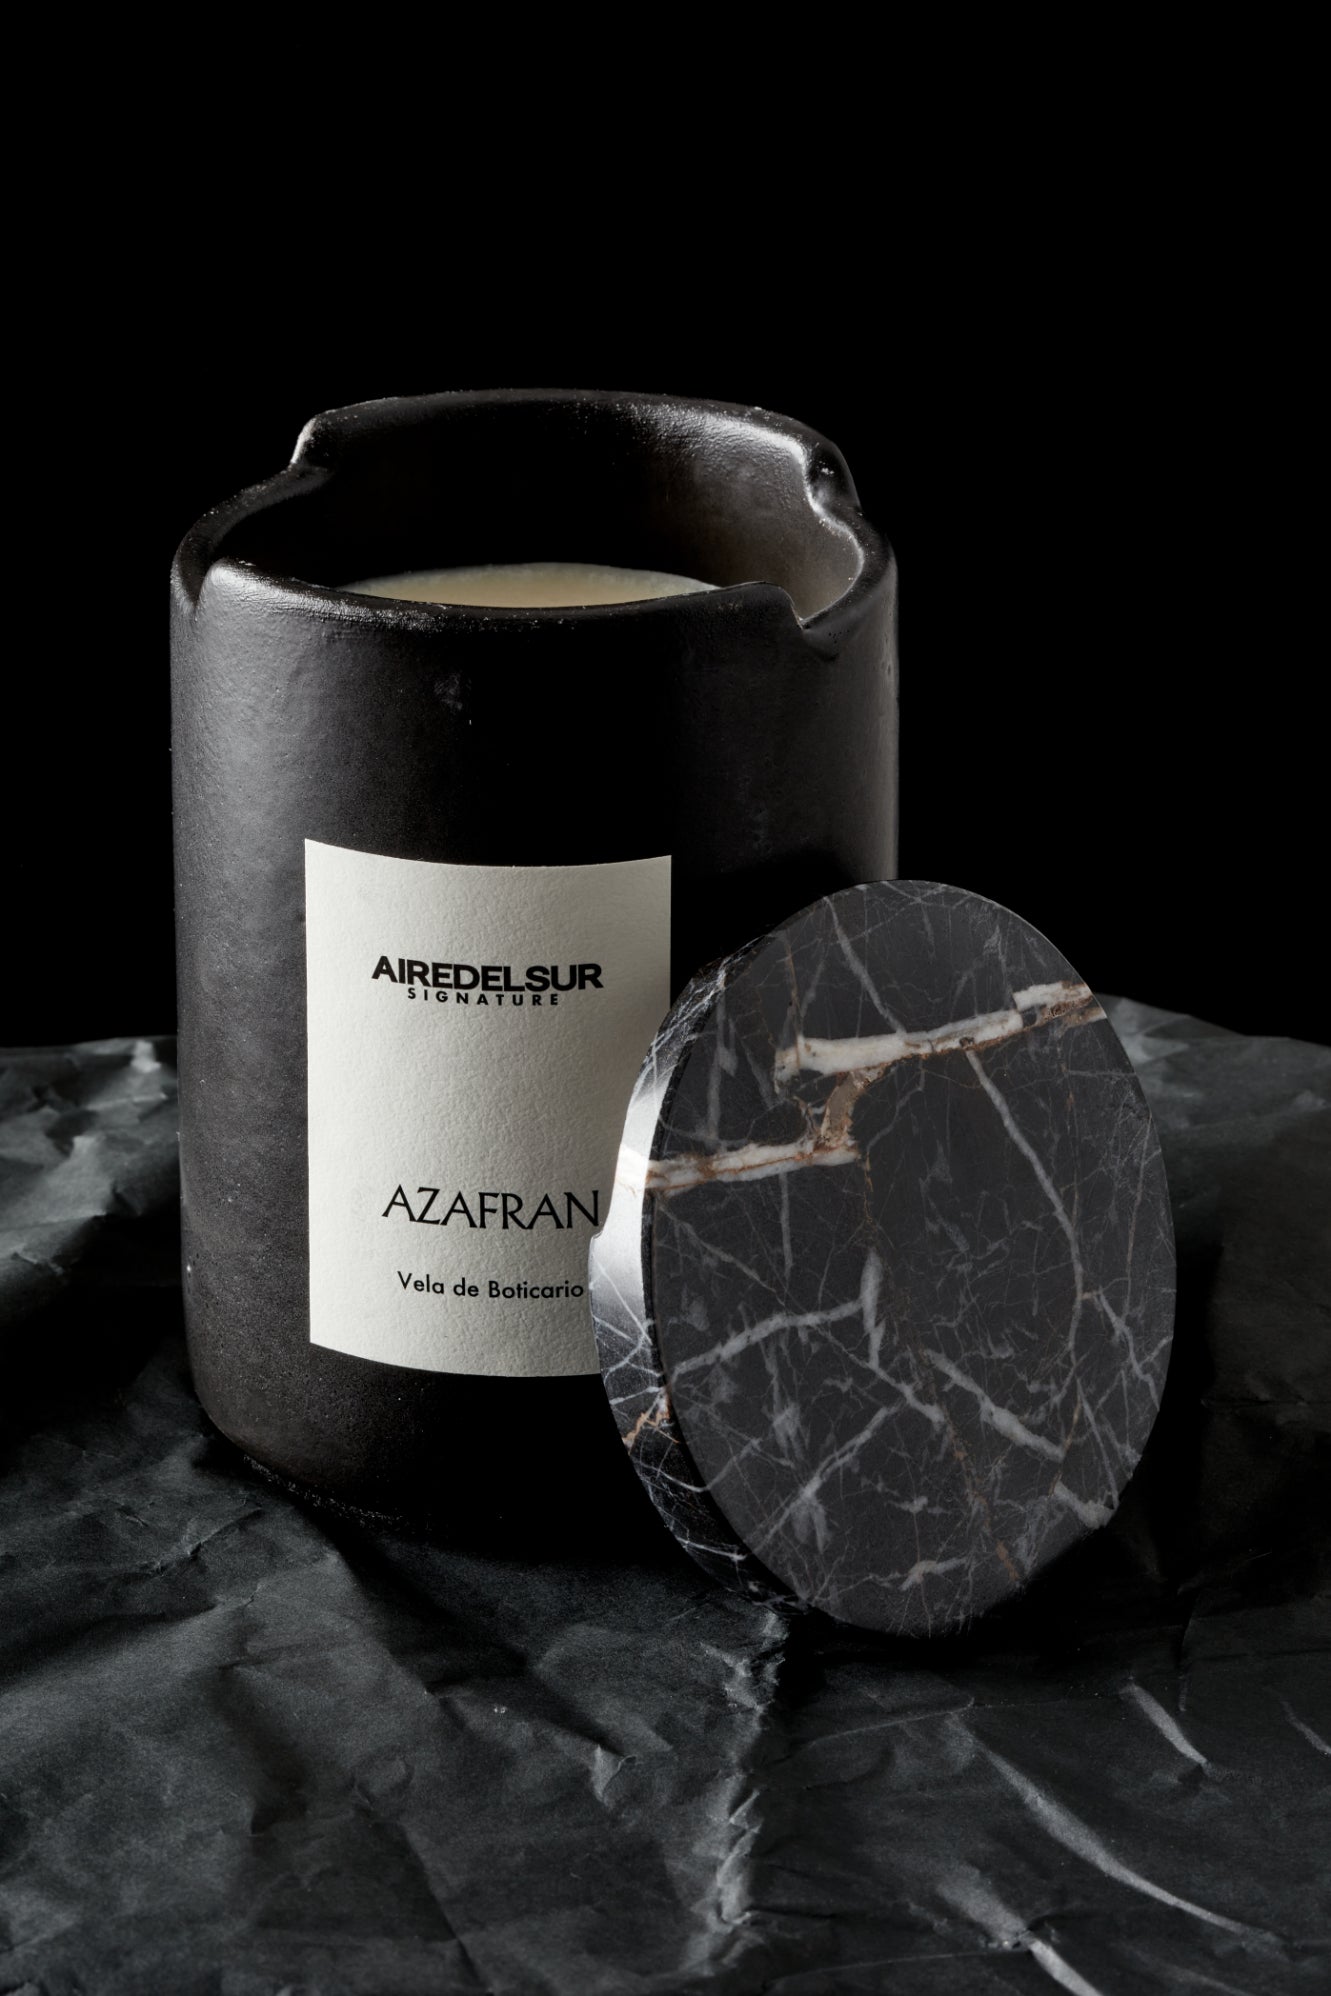 AZAFRAN Signature Scented Candle, Hand Painted Ceramic & Natural Onyx Stone For Sale